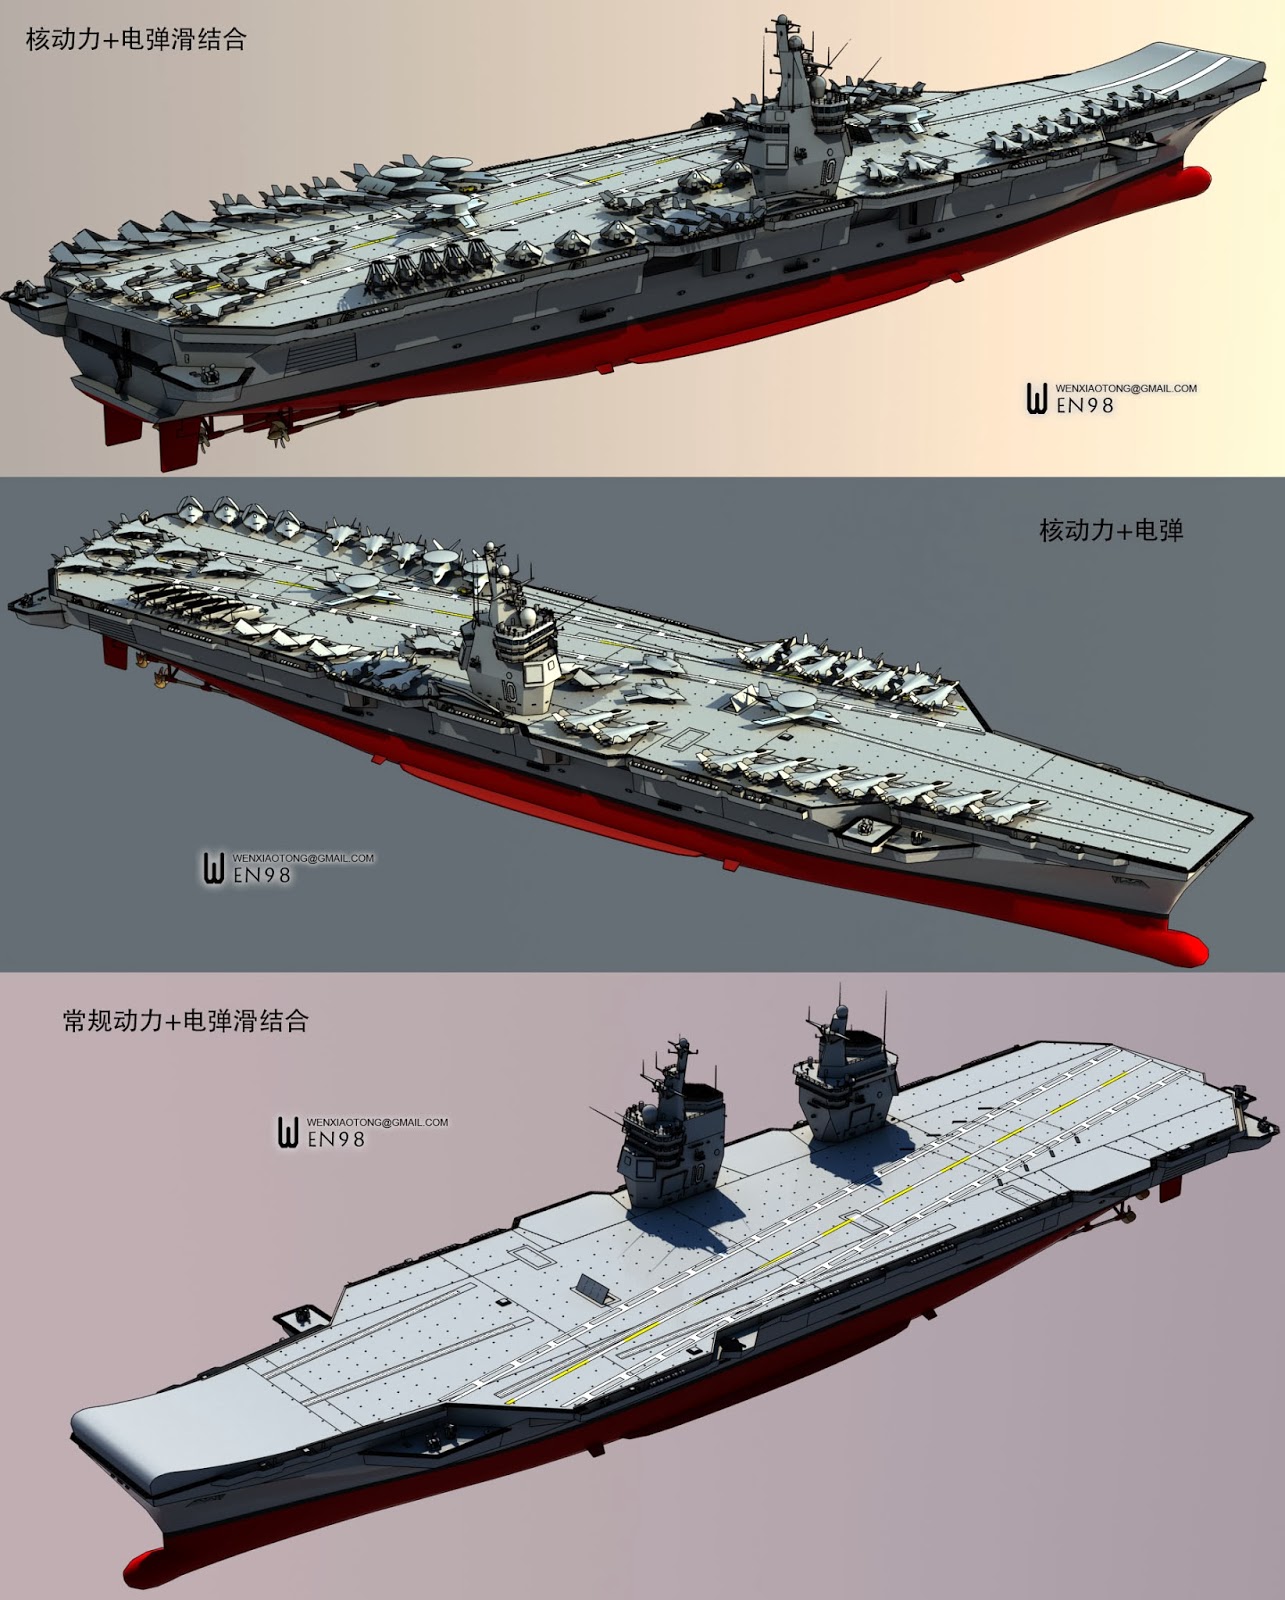 China's Future Aircraft Carrier_2